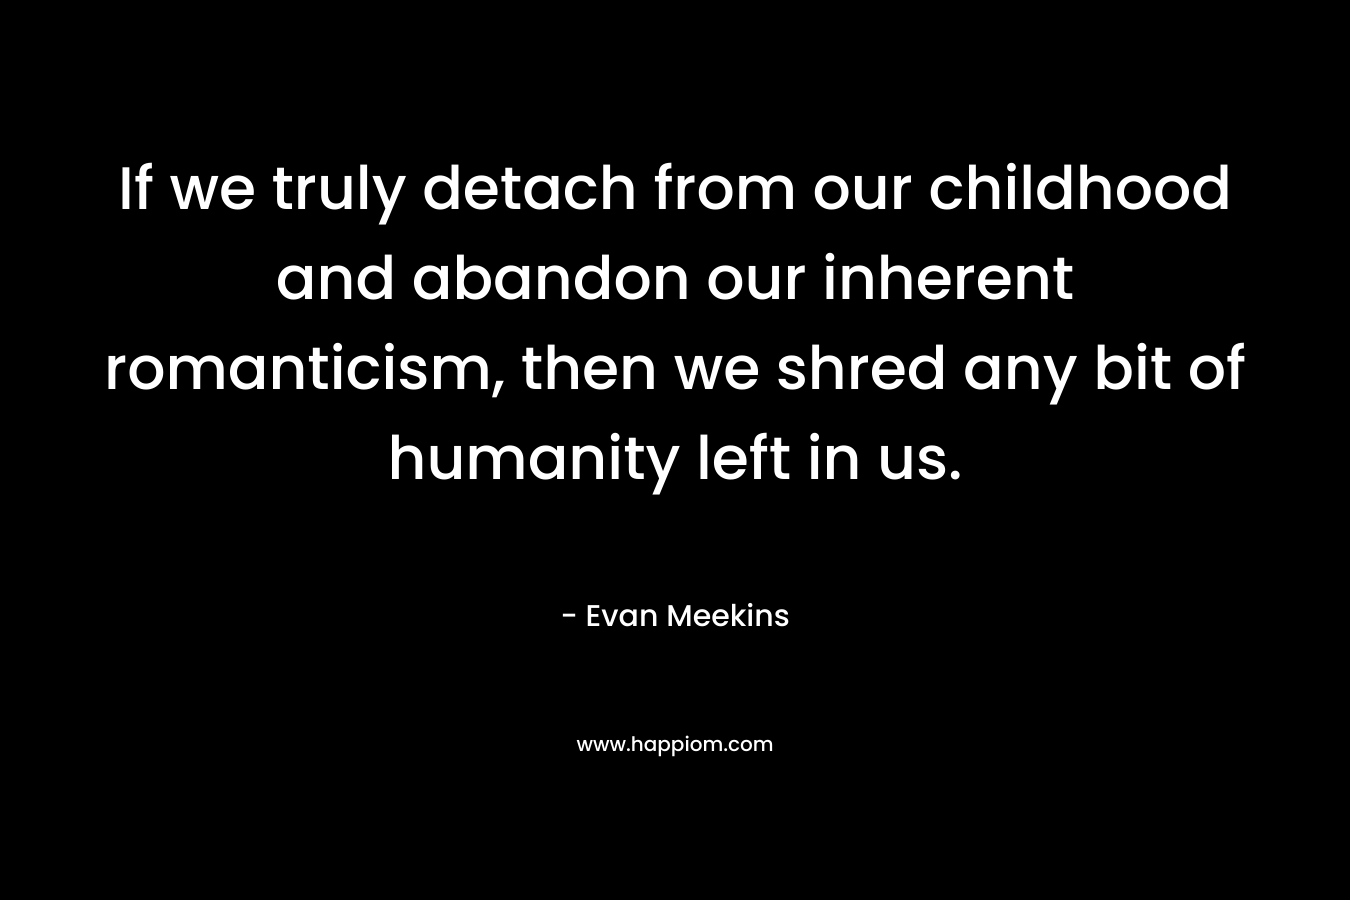 If we truly detach from our childhood and abandon our inherent romanticism, then we shred any bit of humanity left in us. – Evan Meekins